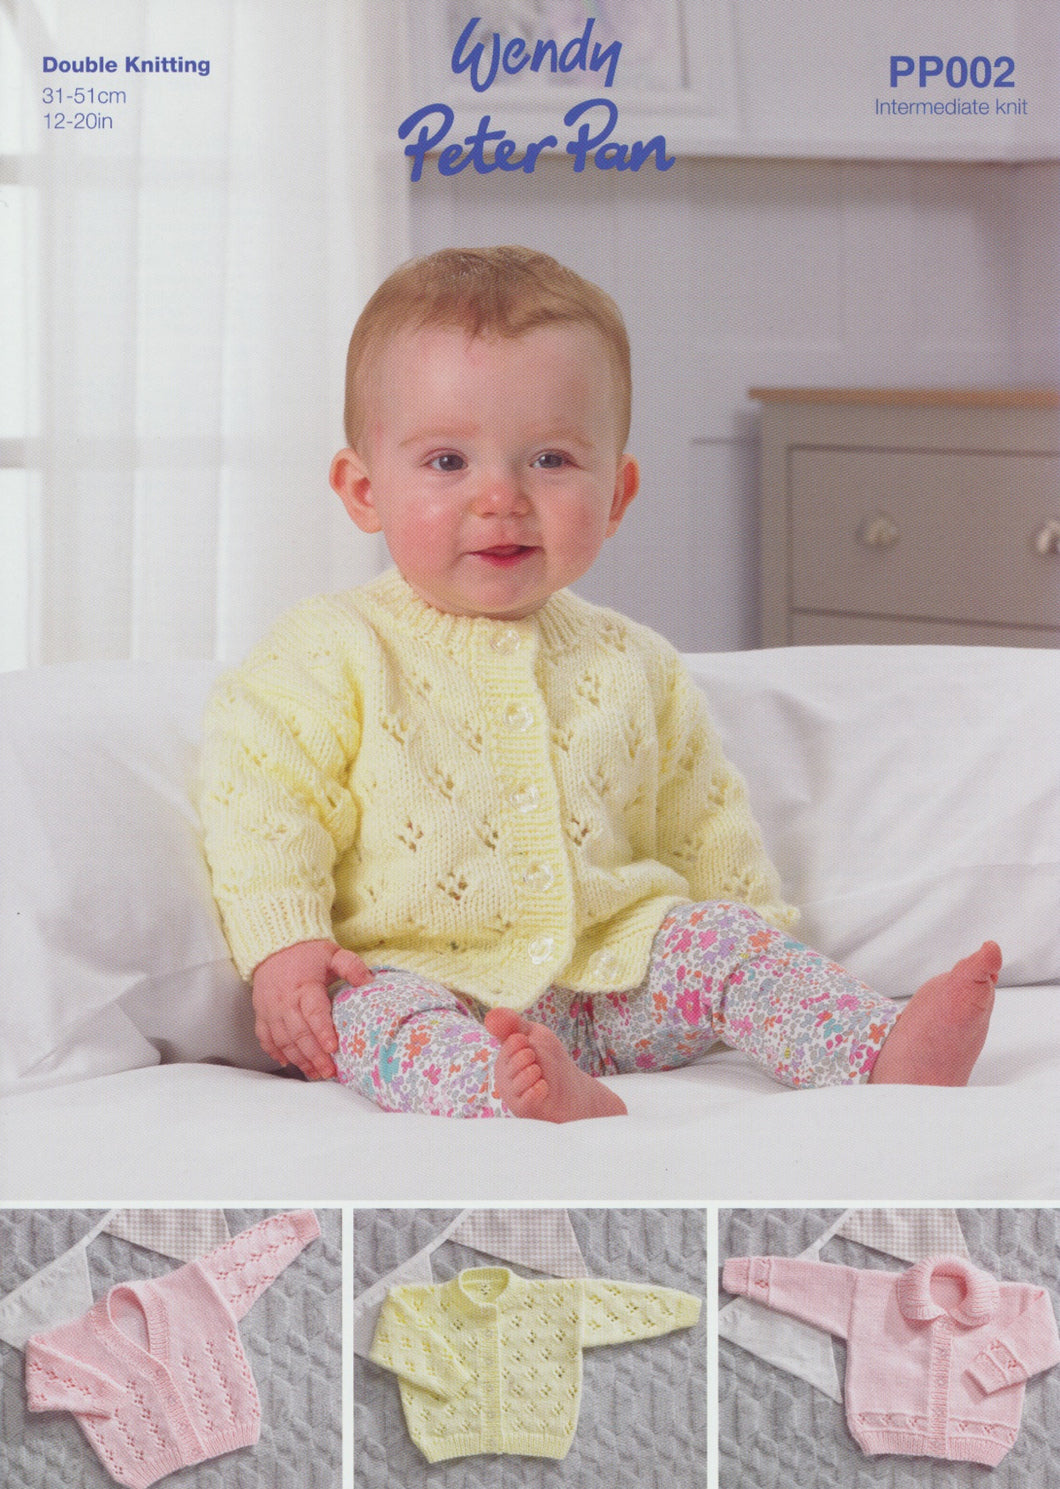 Wendy Peter Pan Baby Double Knitting Pattern - Cardigans (PP002)